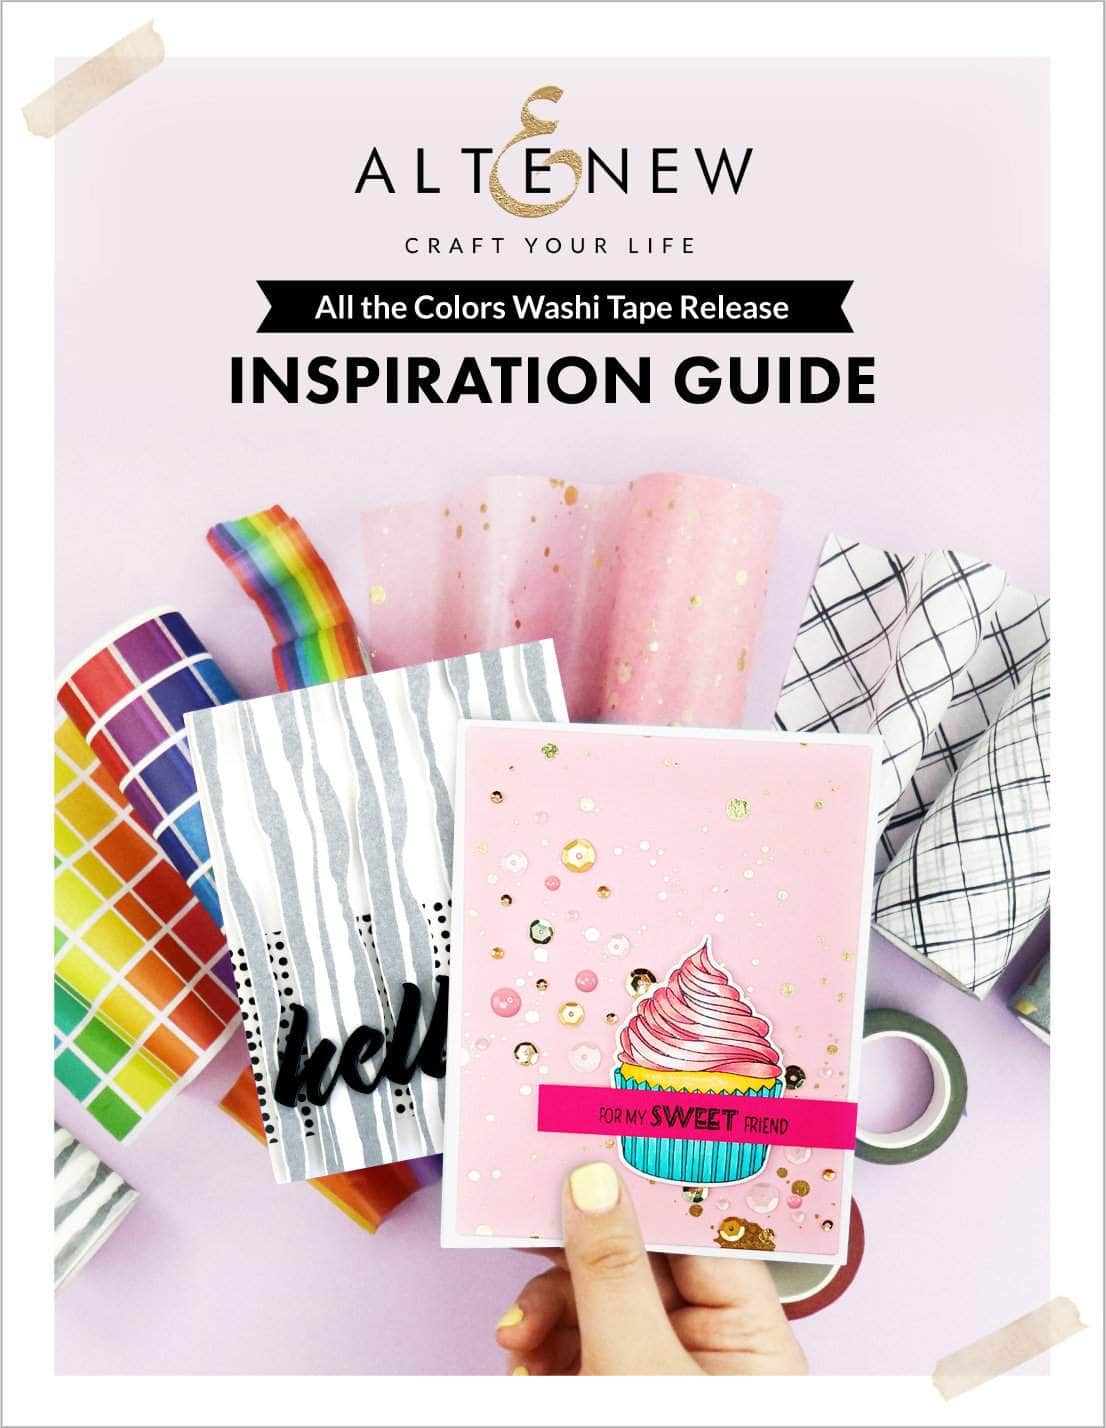 Printed Media All the Colors Washi Tape Release Inspiration Guide